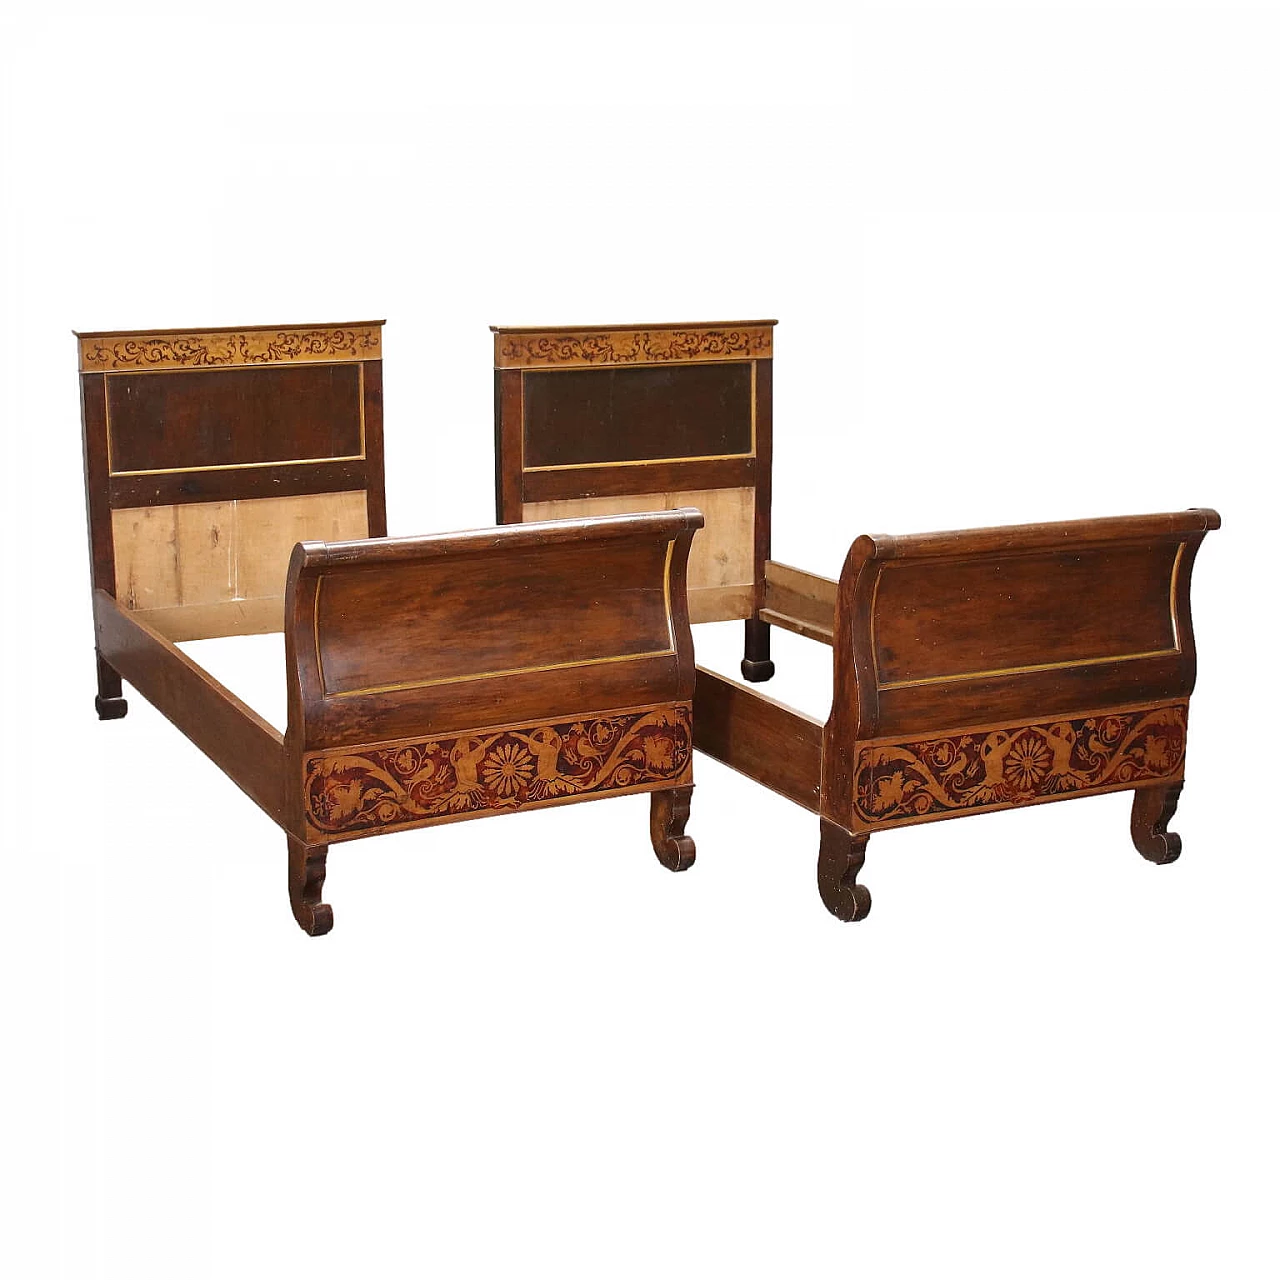 Pair of Charles X beds in pear and maple wood, 19th century 1